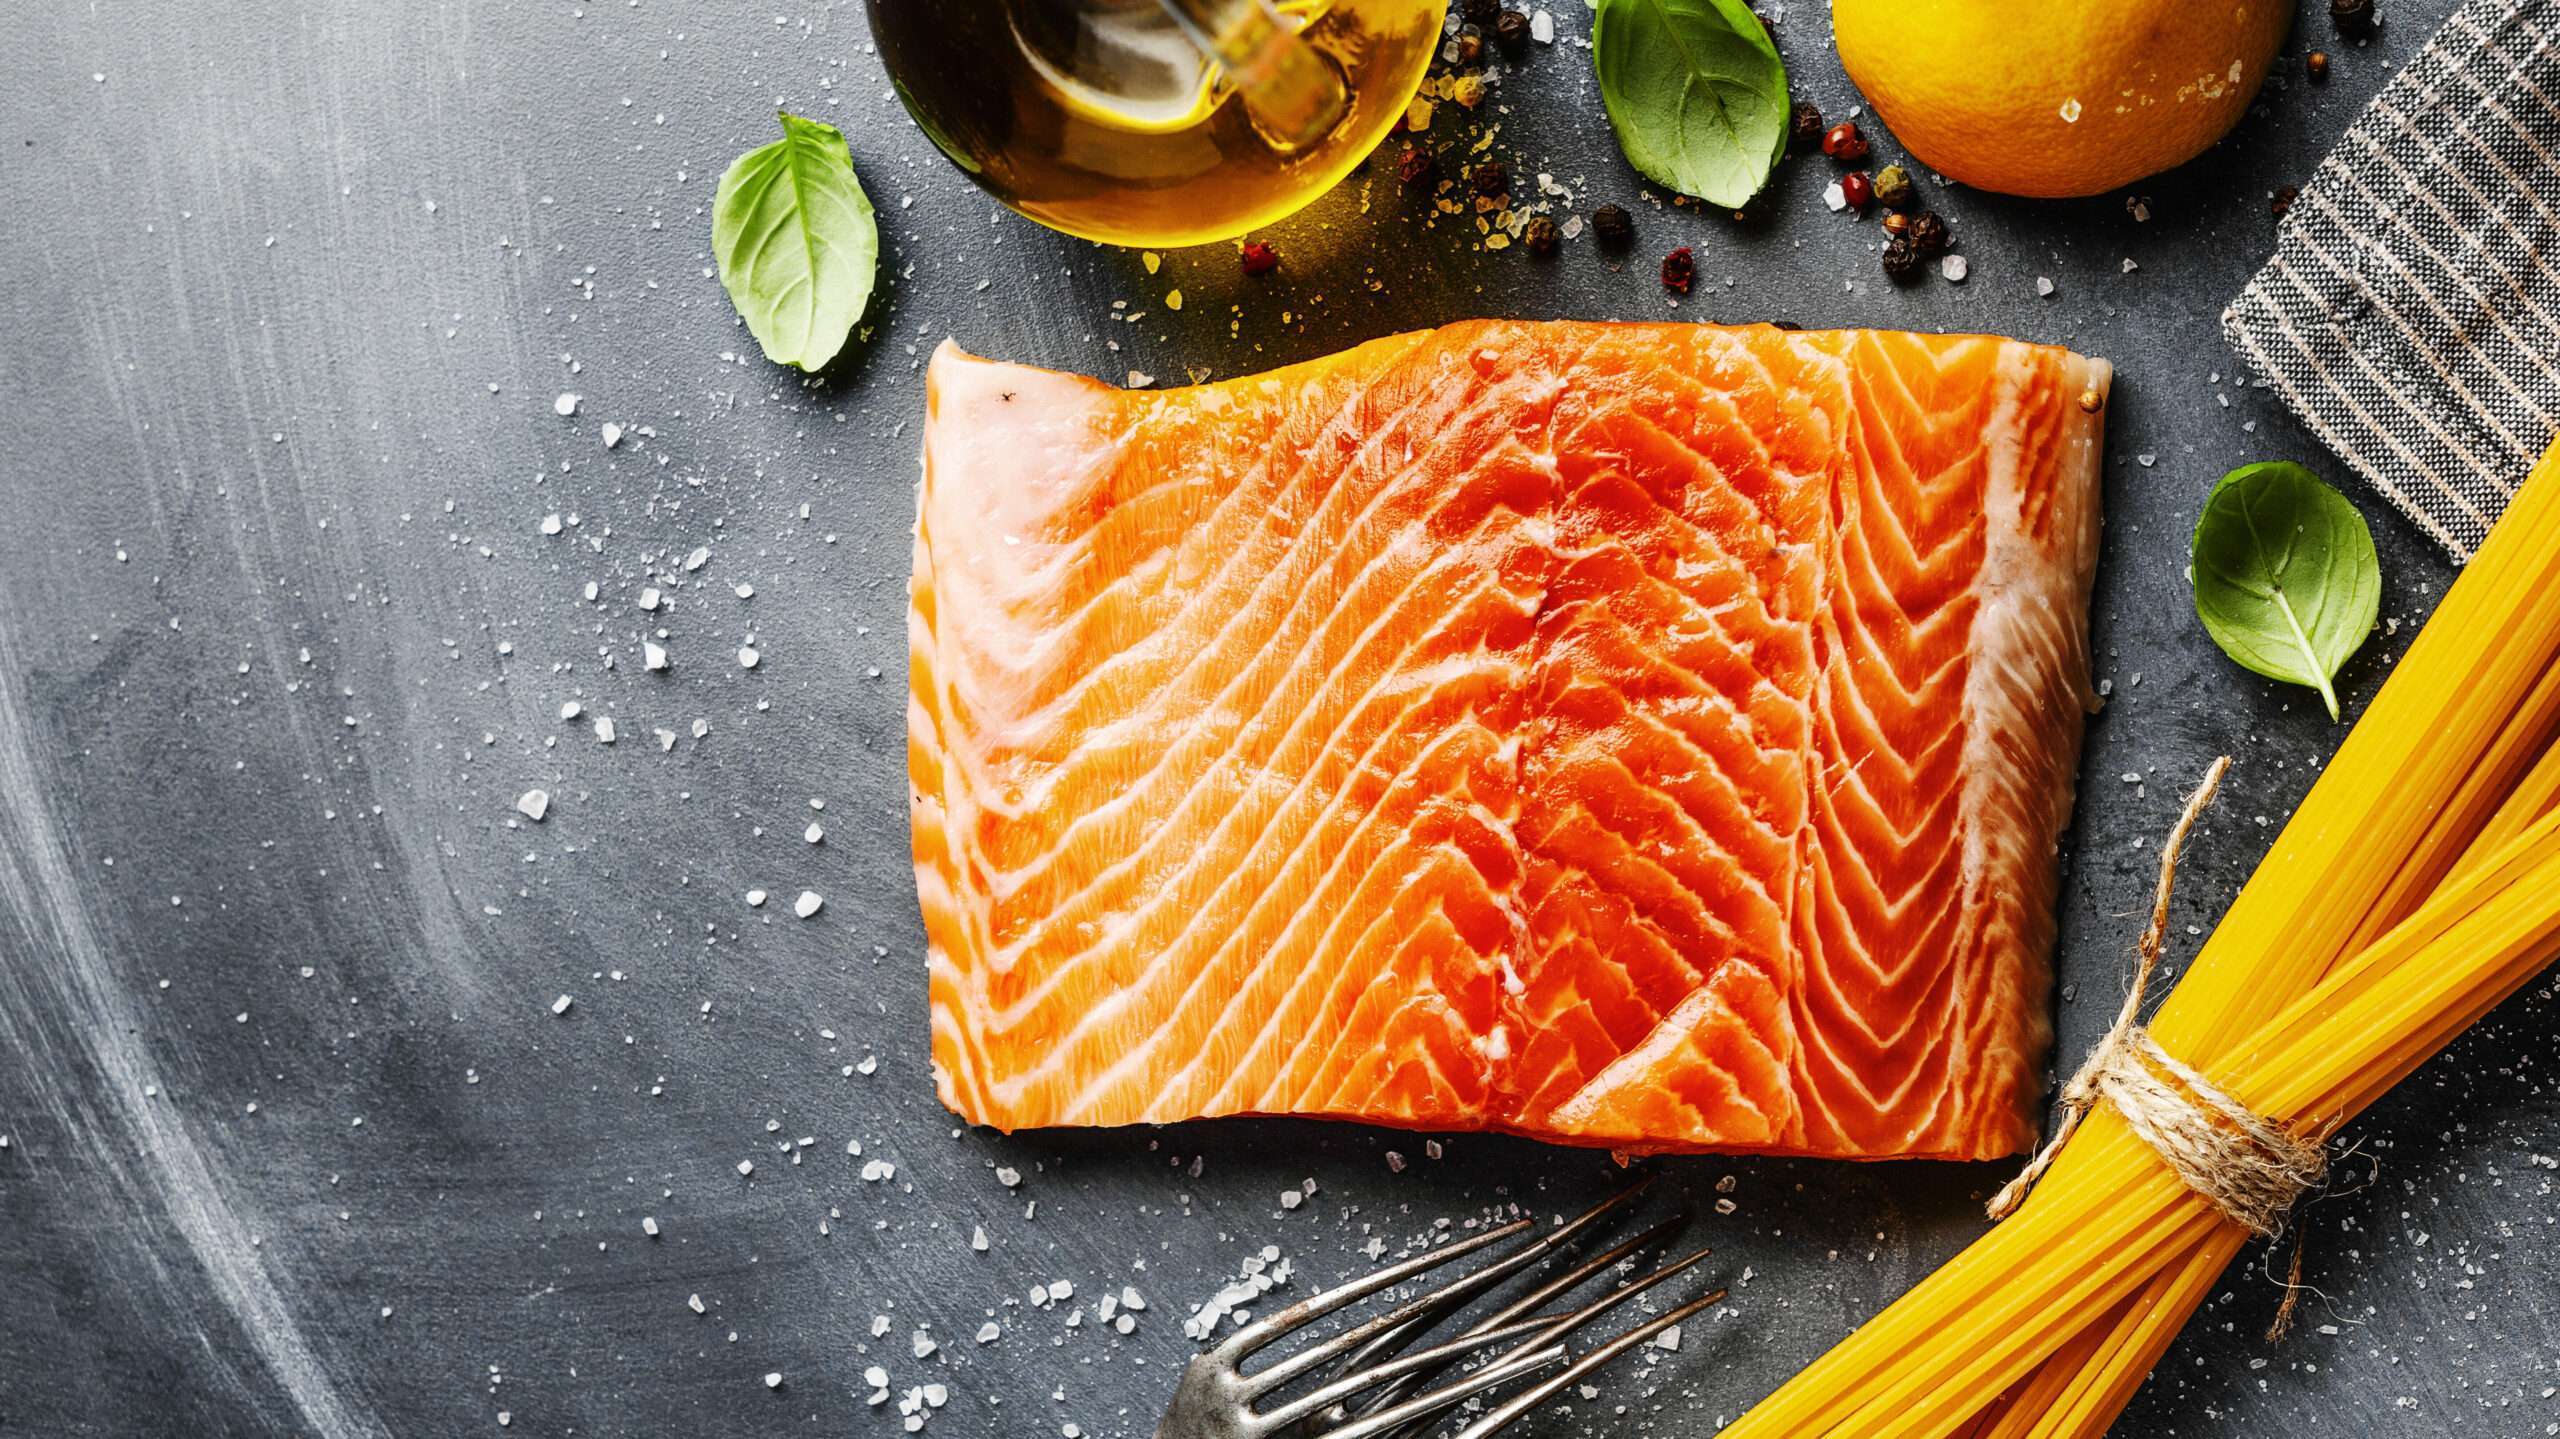 Salmon is healthy source of magnesium according to functional medicine